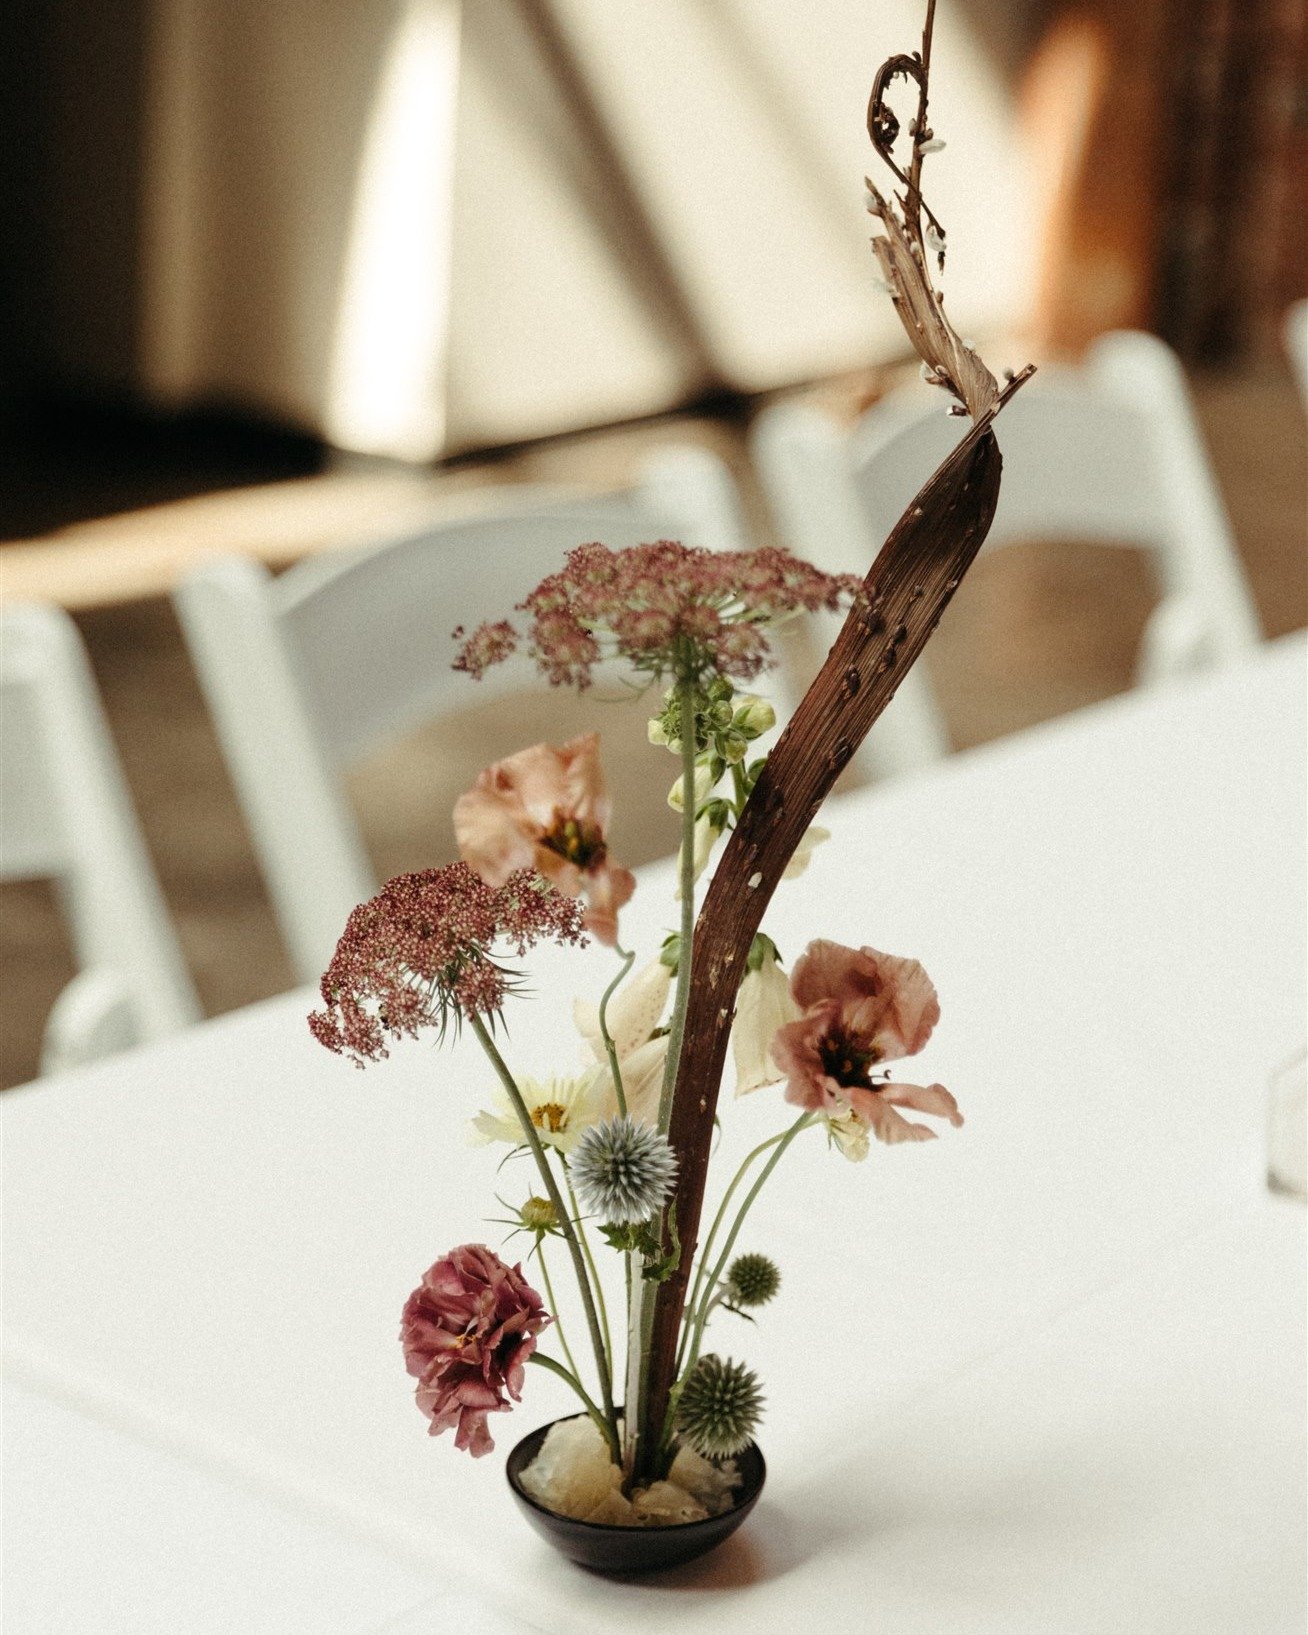 Ikebana roughly translates to &quot;making flowers come alive&quot; and it has become one of my absolute favorite ways to bring flowers into my home or to a casual dinner party. It looks sophisticated, while also being simple. It can be done with as 